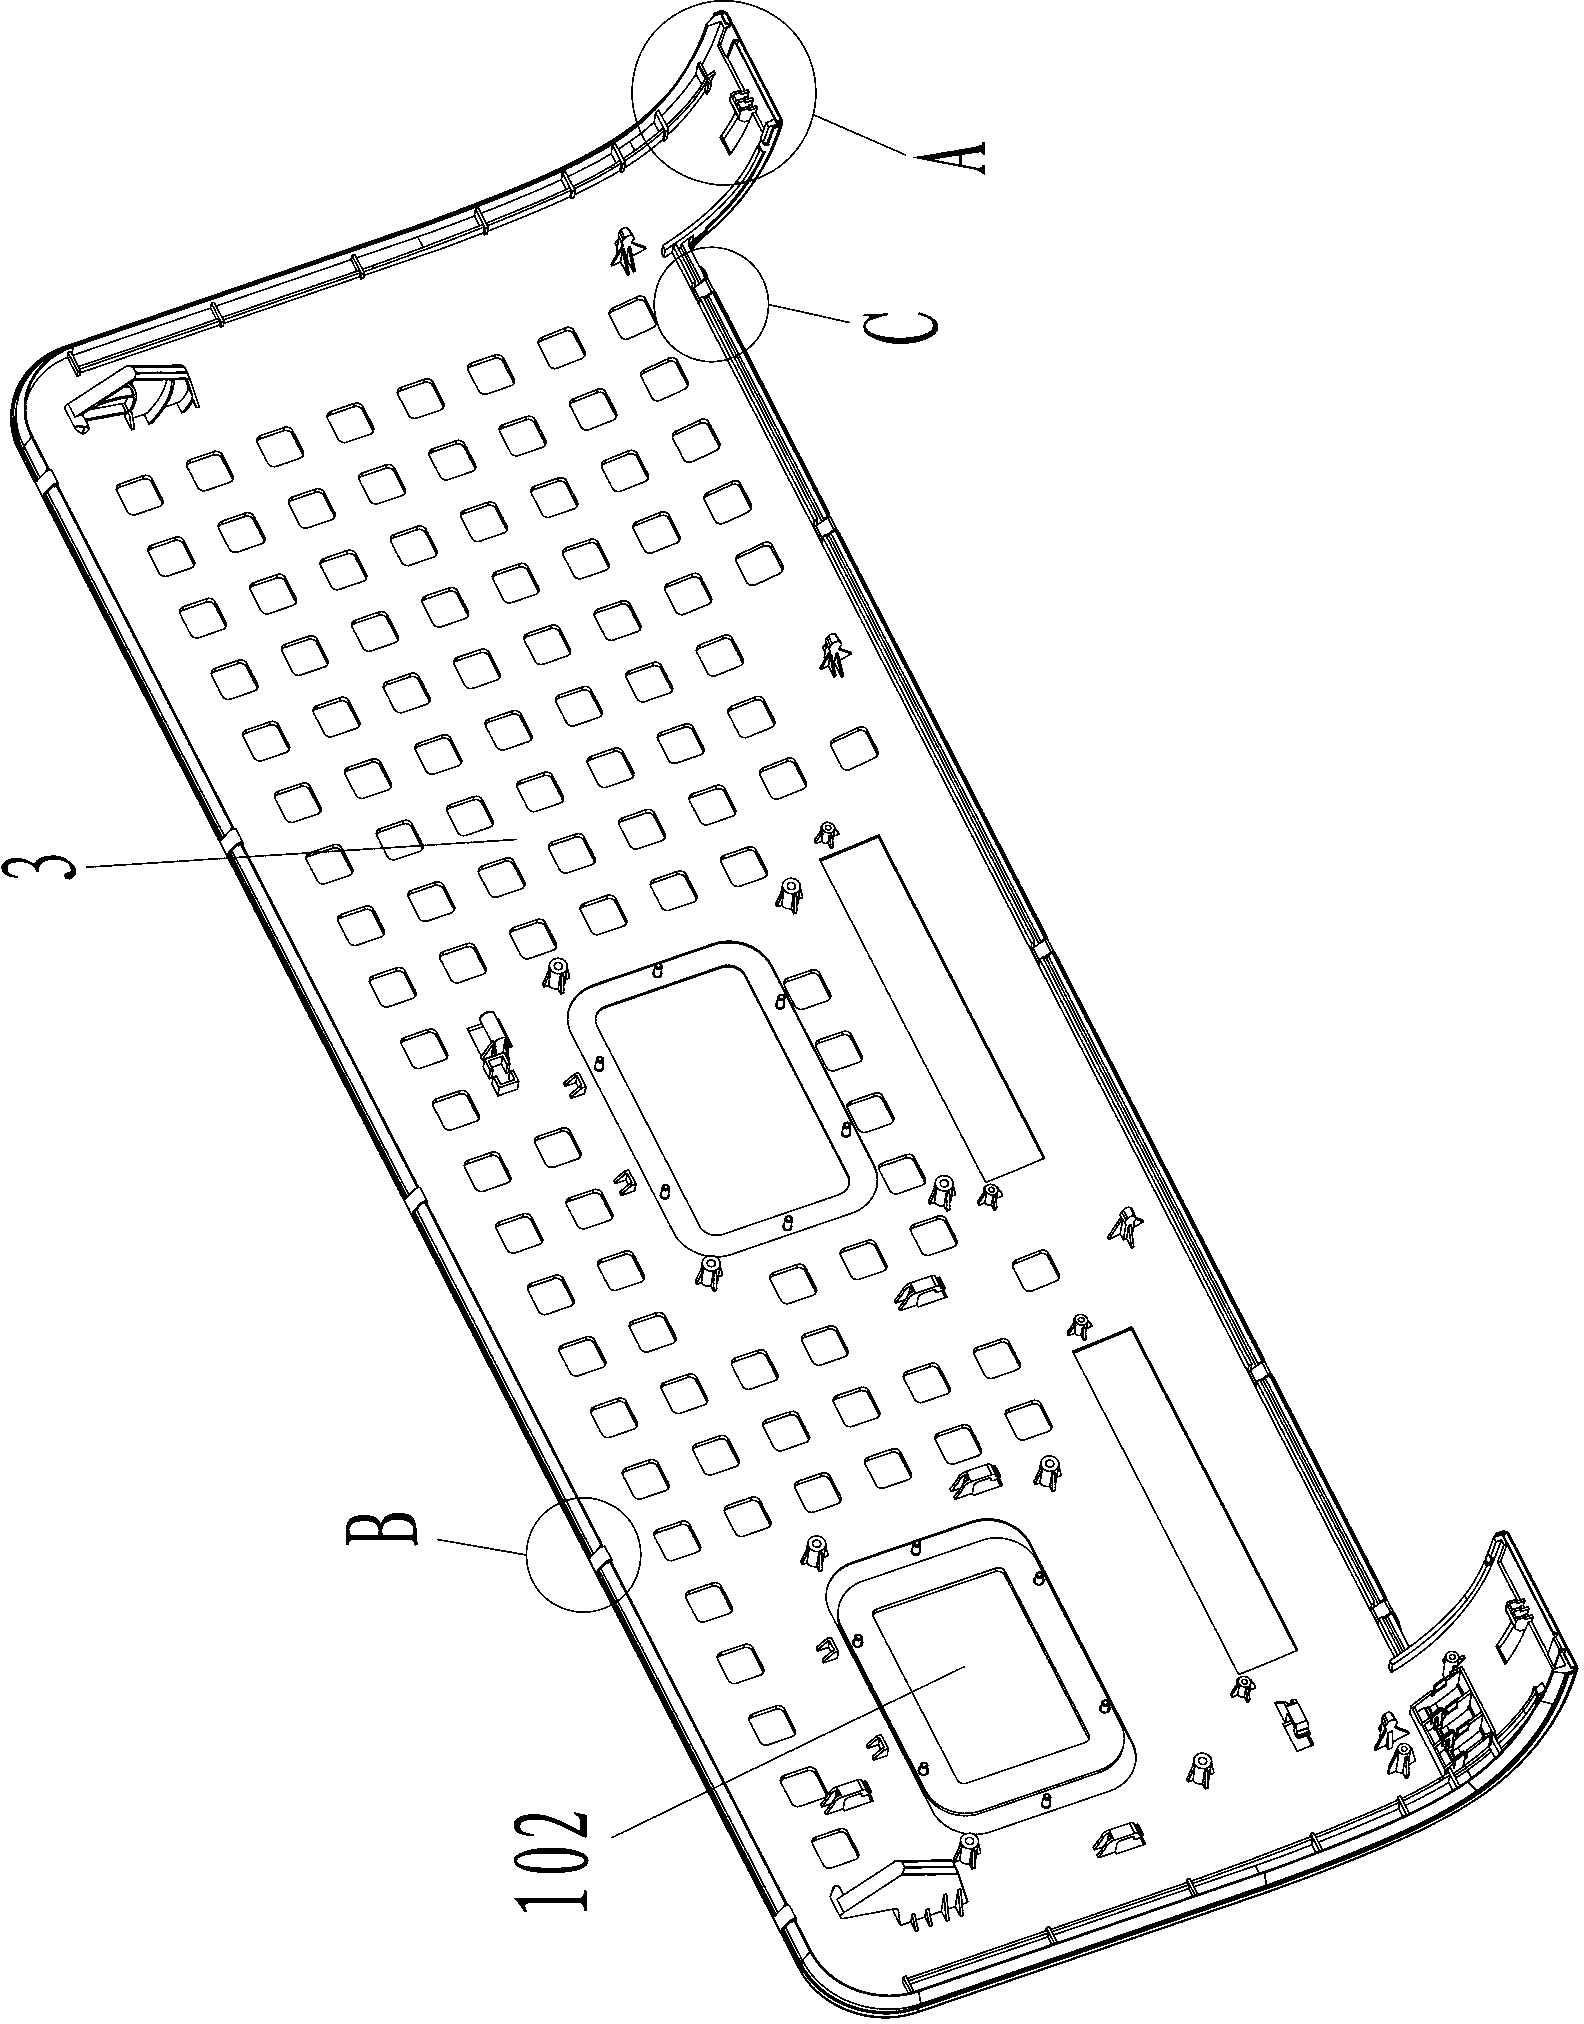 Panel structure of wall-mounted air conditioner